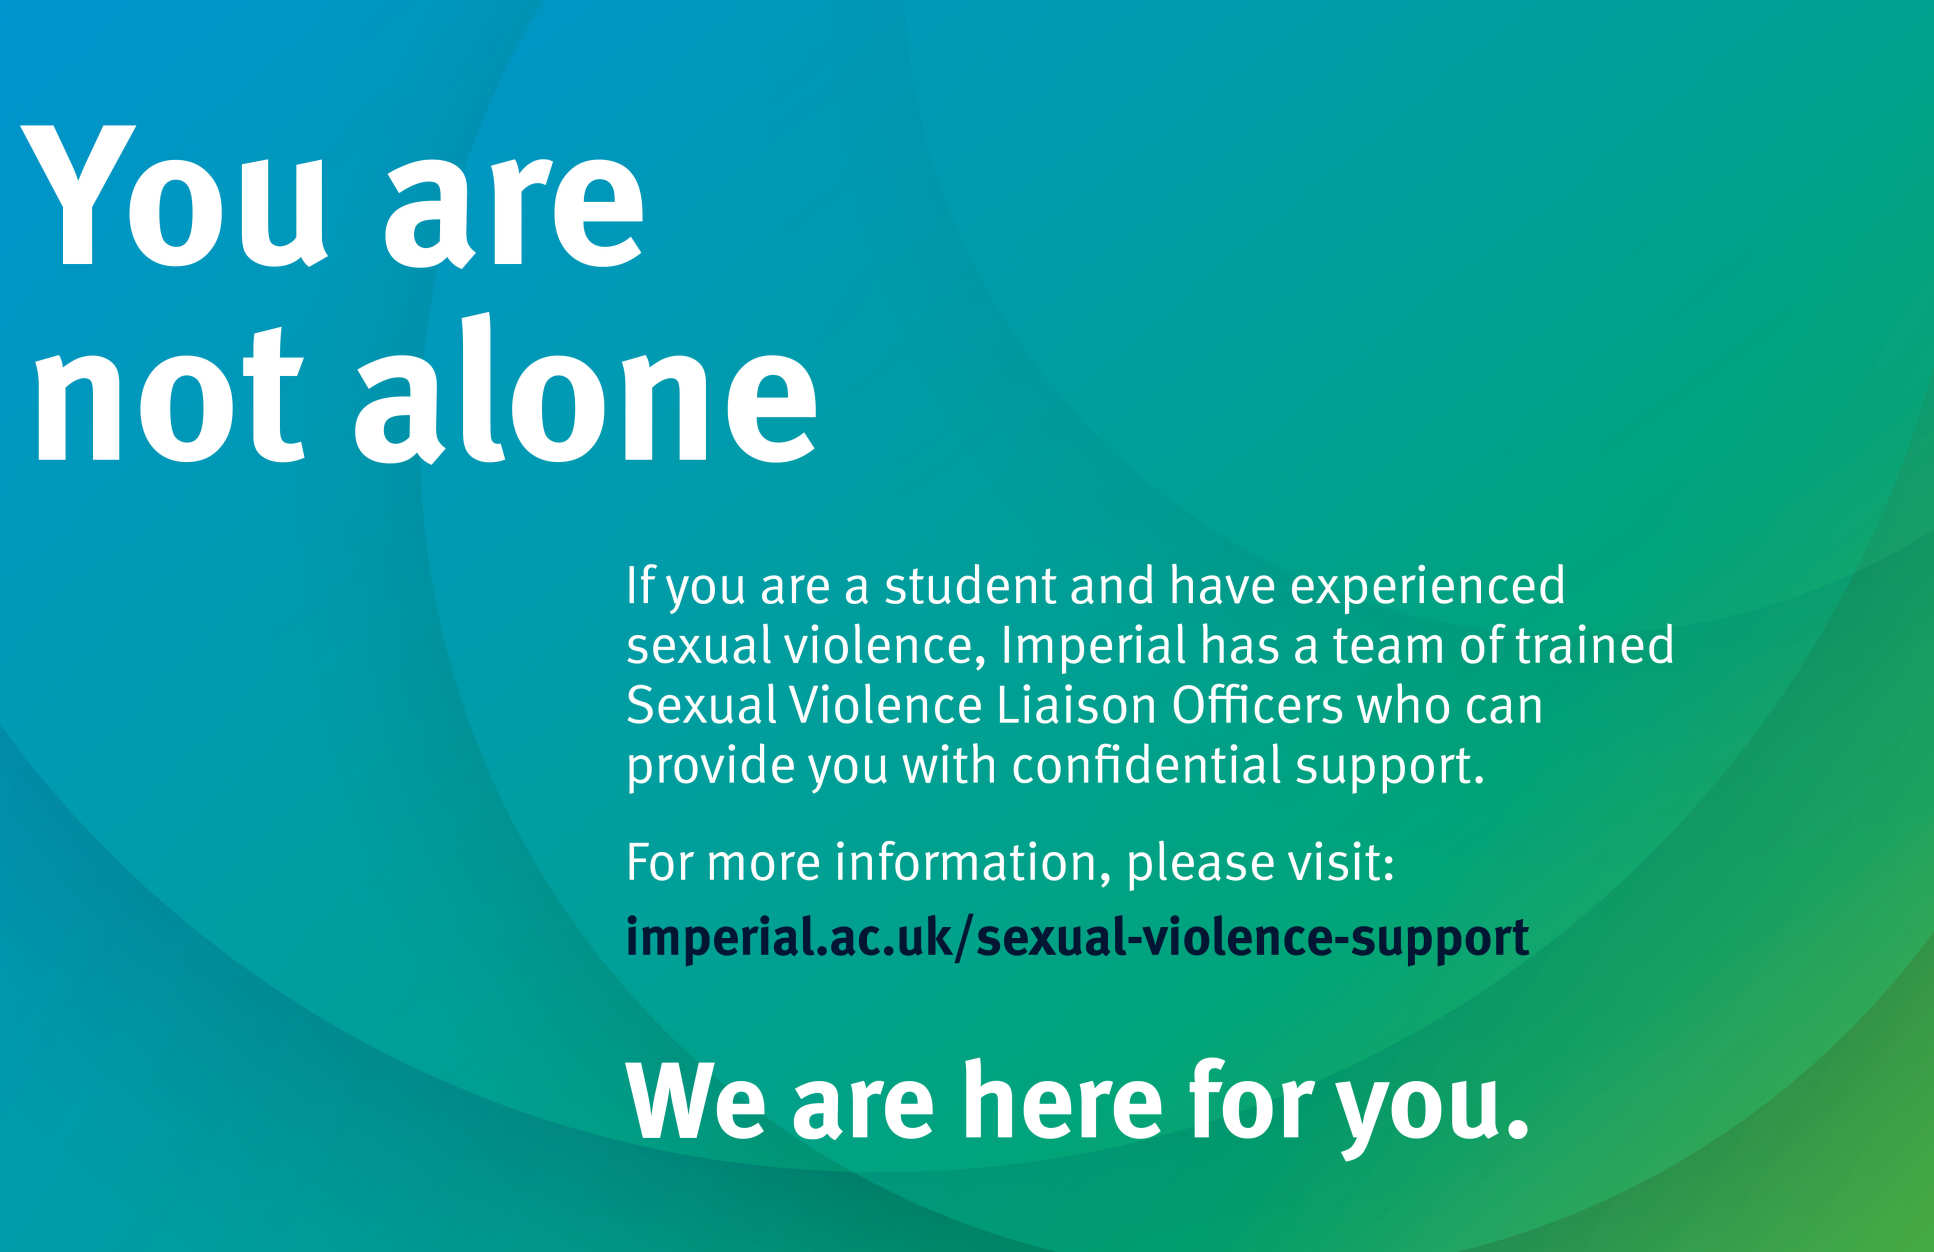 Image with words 'you are not alone' signposting students to information about contacting a Sexual Violence Liaison Officer